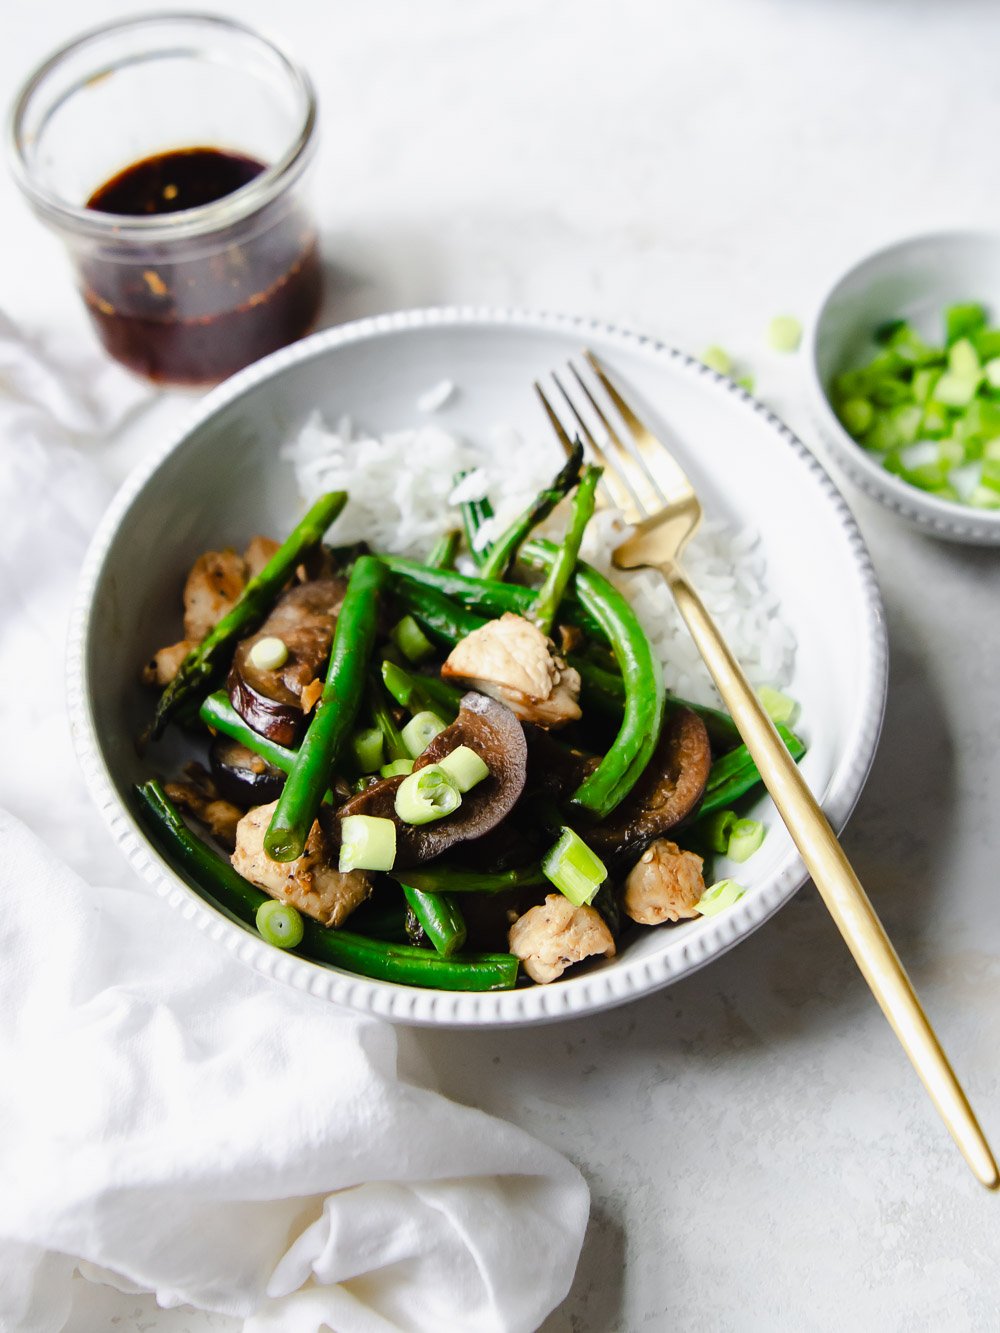 Bowl of chicken vegetable stir fry with string beans, eggplant and asparagus. Garnished with green onions and a gold fork.